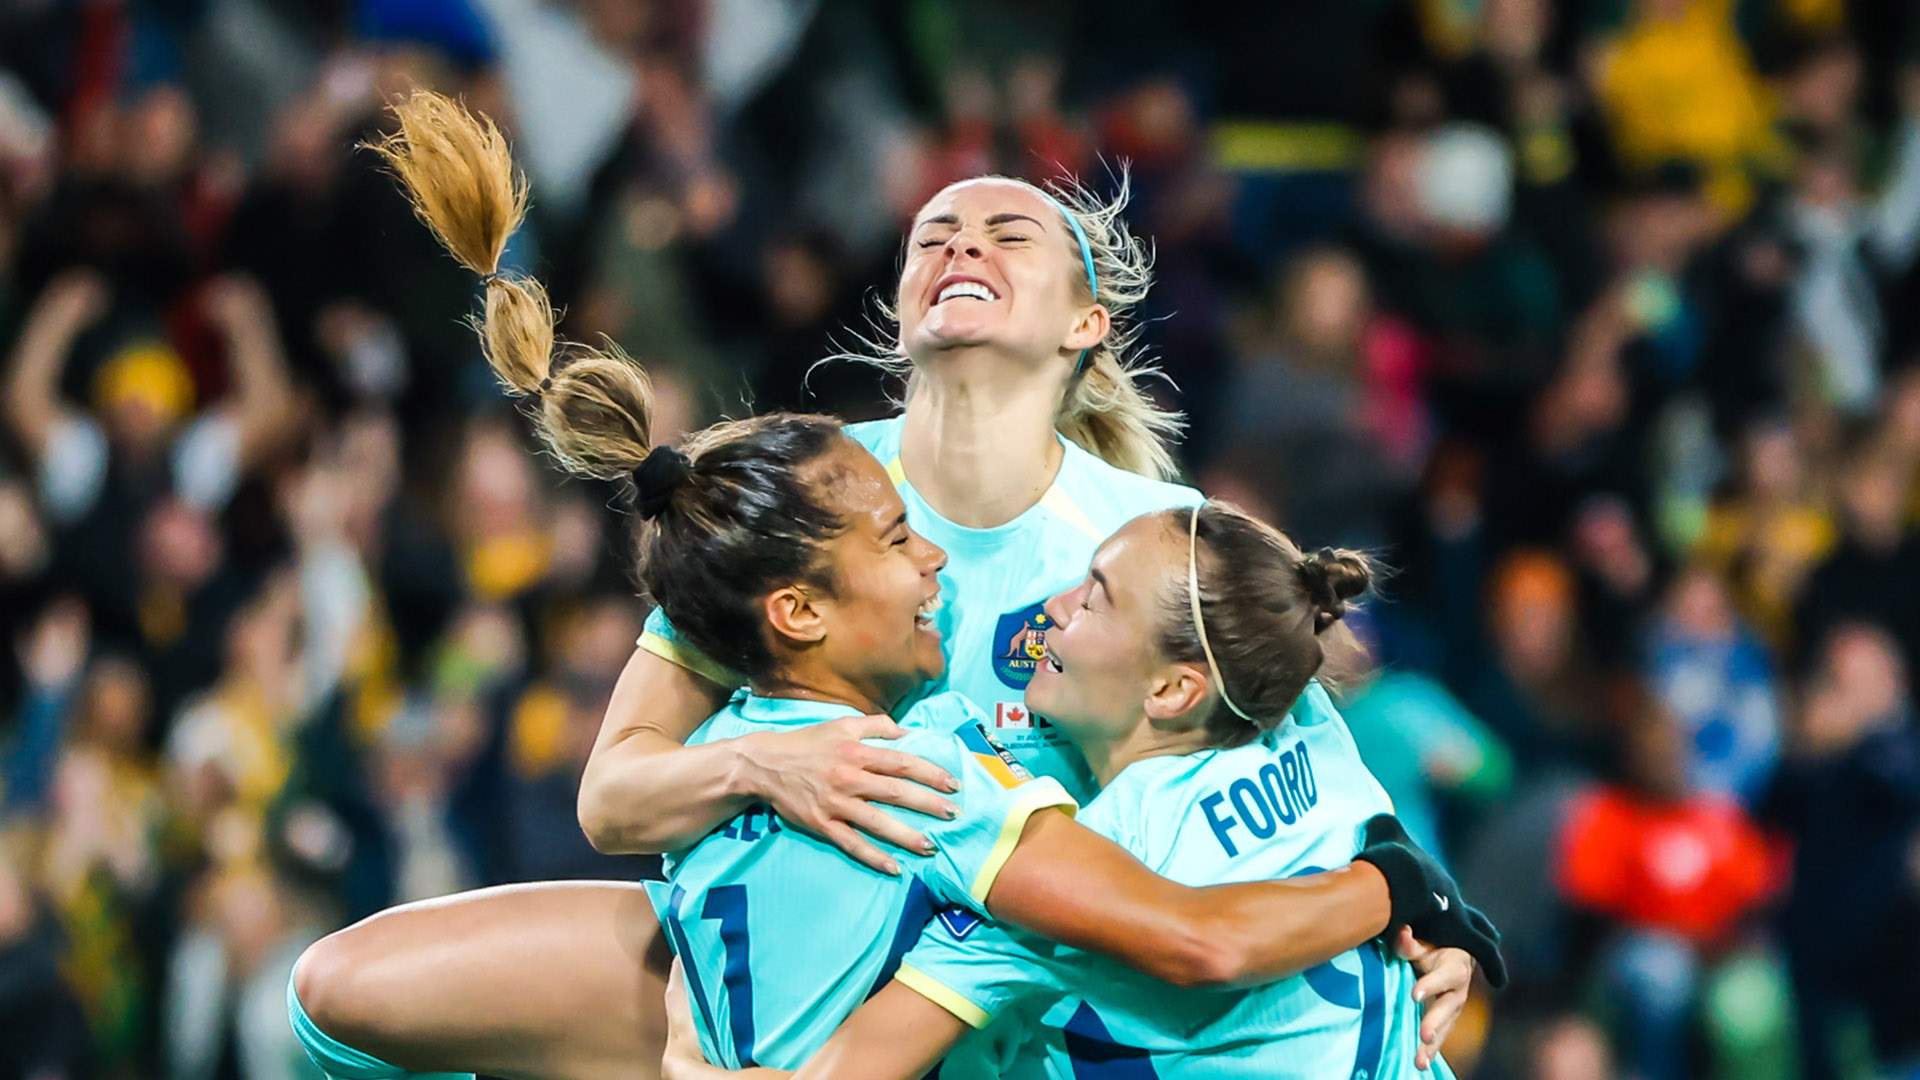 The Matildas Are Back in Australia to Play Three Games Over the Next Week If You're Missing the Women's World Cup